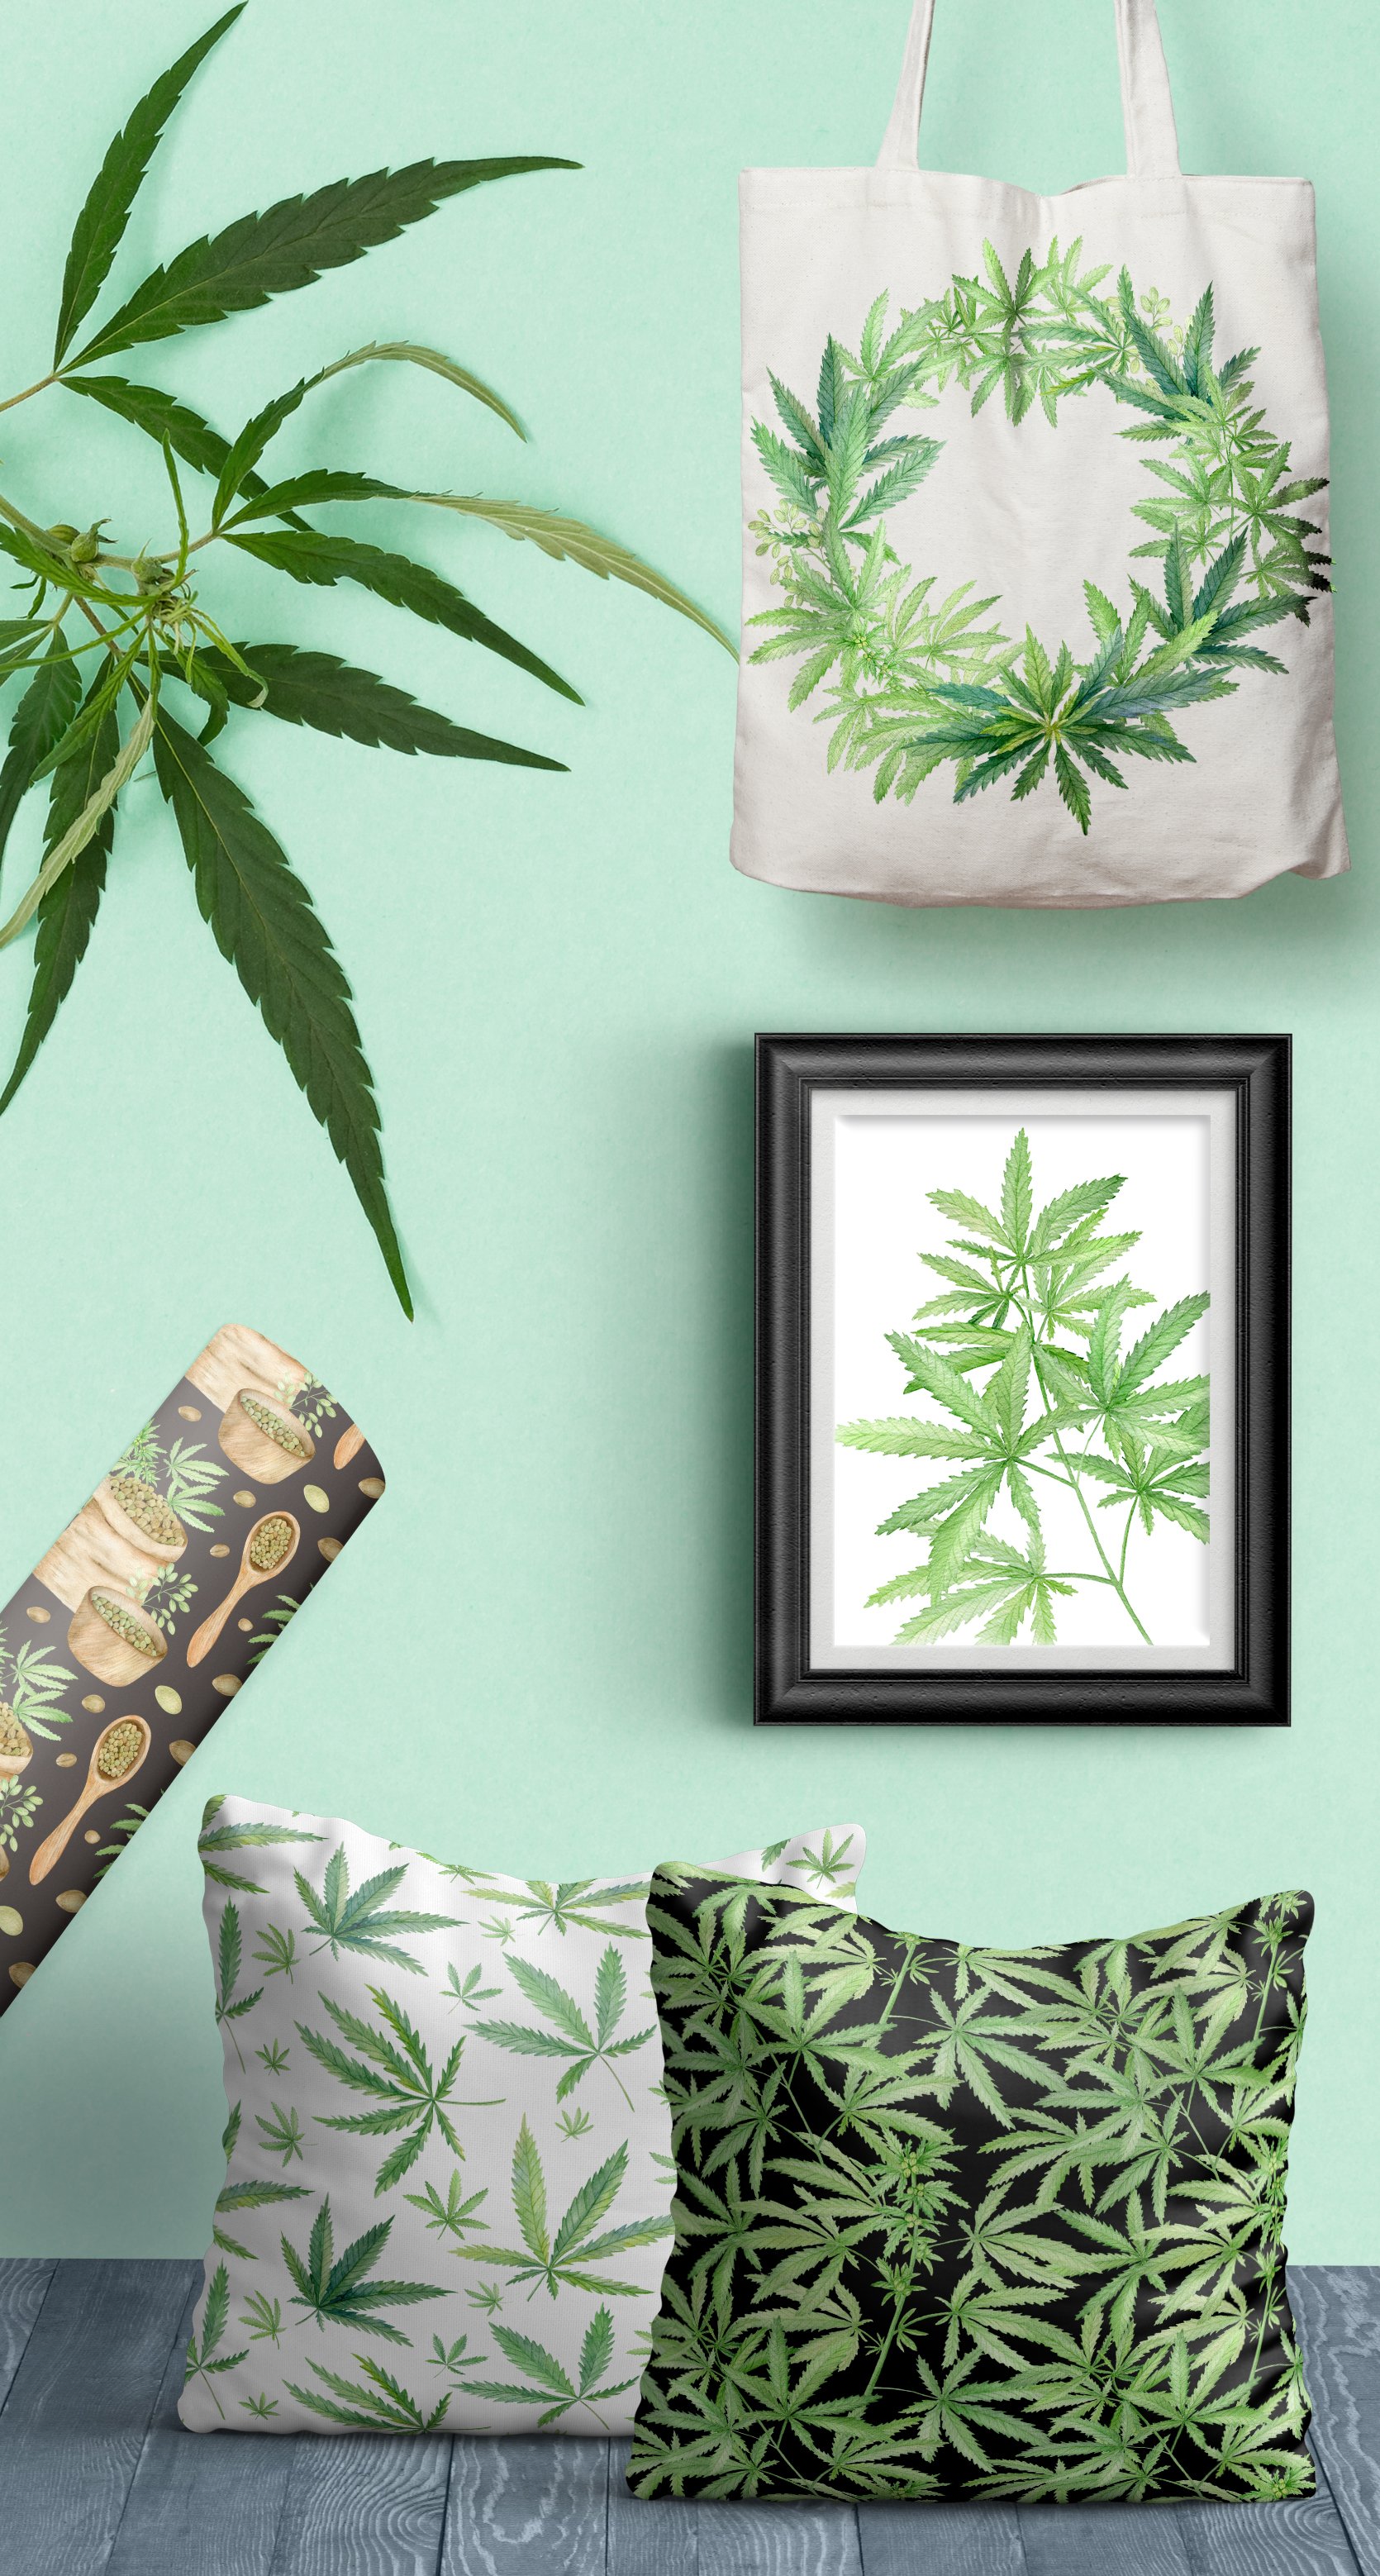 Picture of a potted plant next to a picture of a marijuana plant.